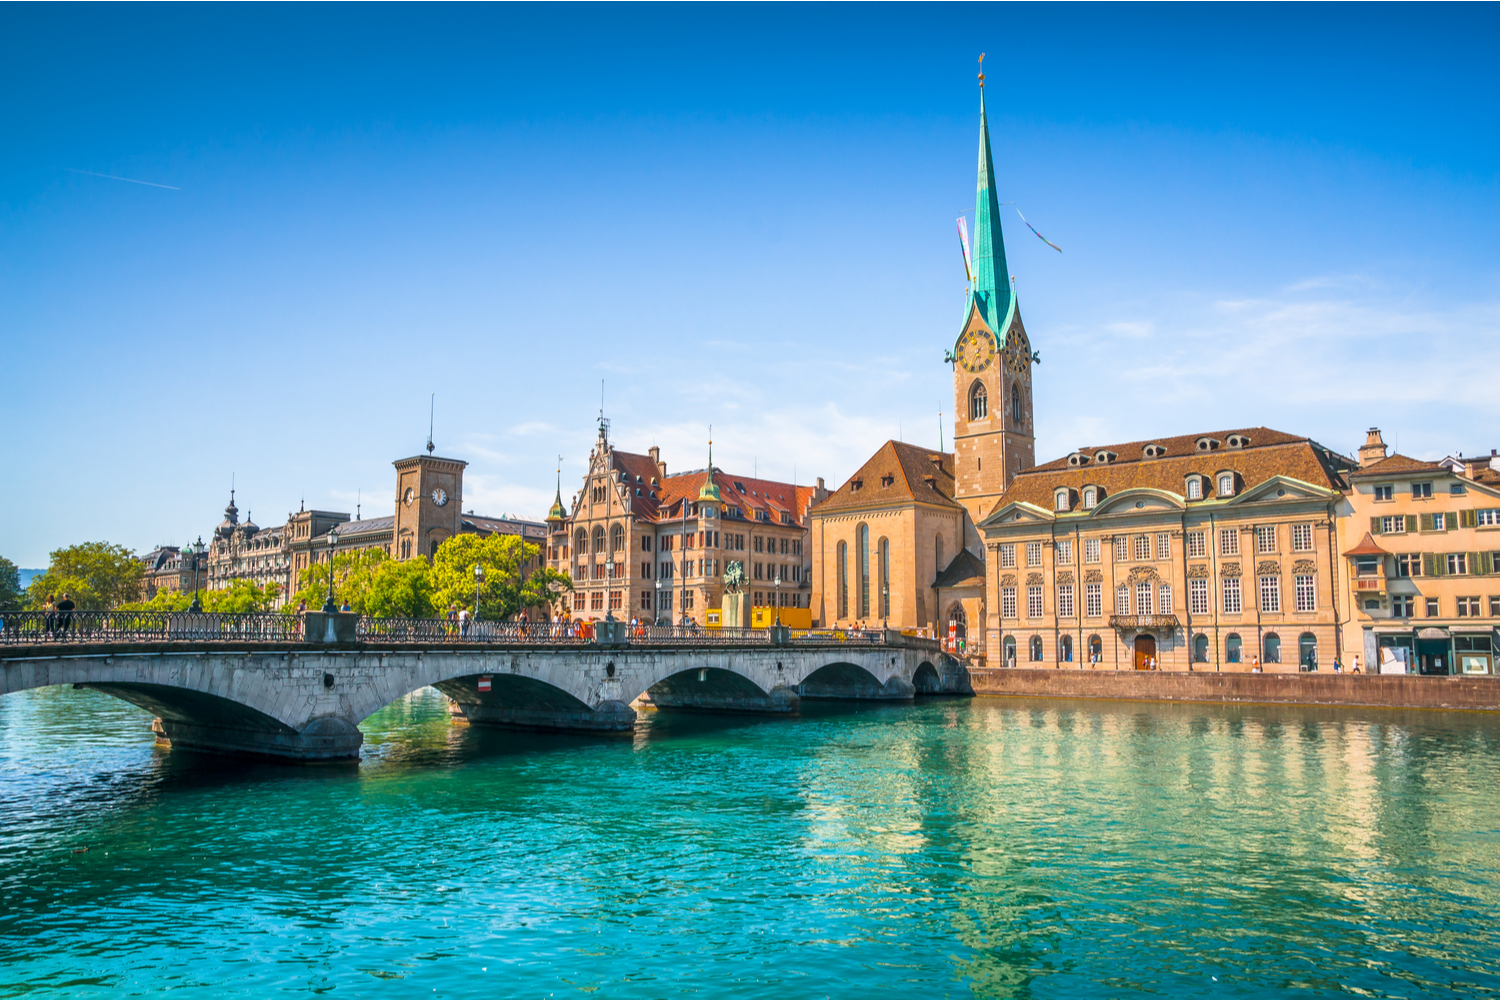 Private-swiss-bank-rolls-out-new-premium-crypto-trading-service